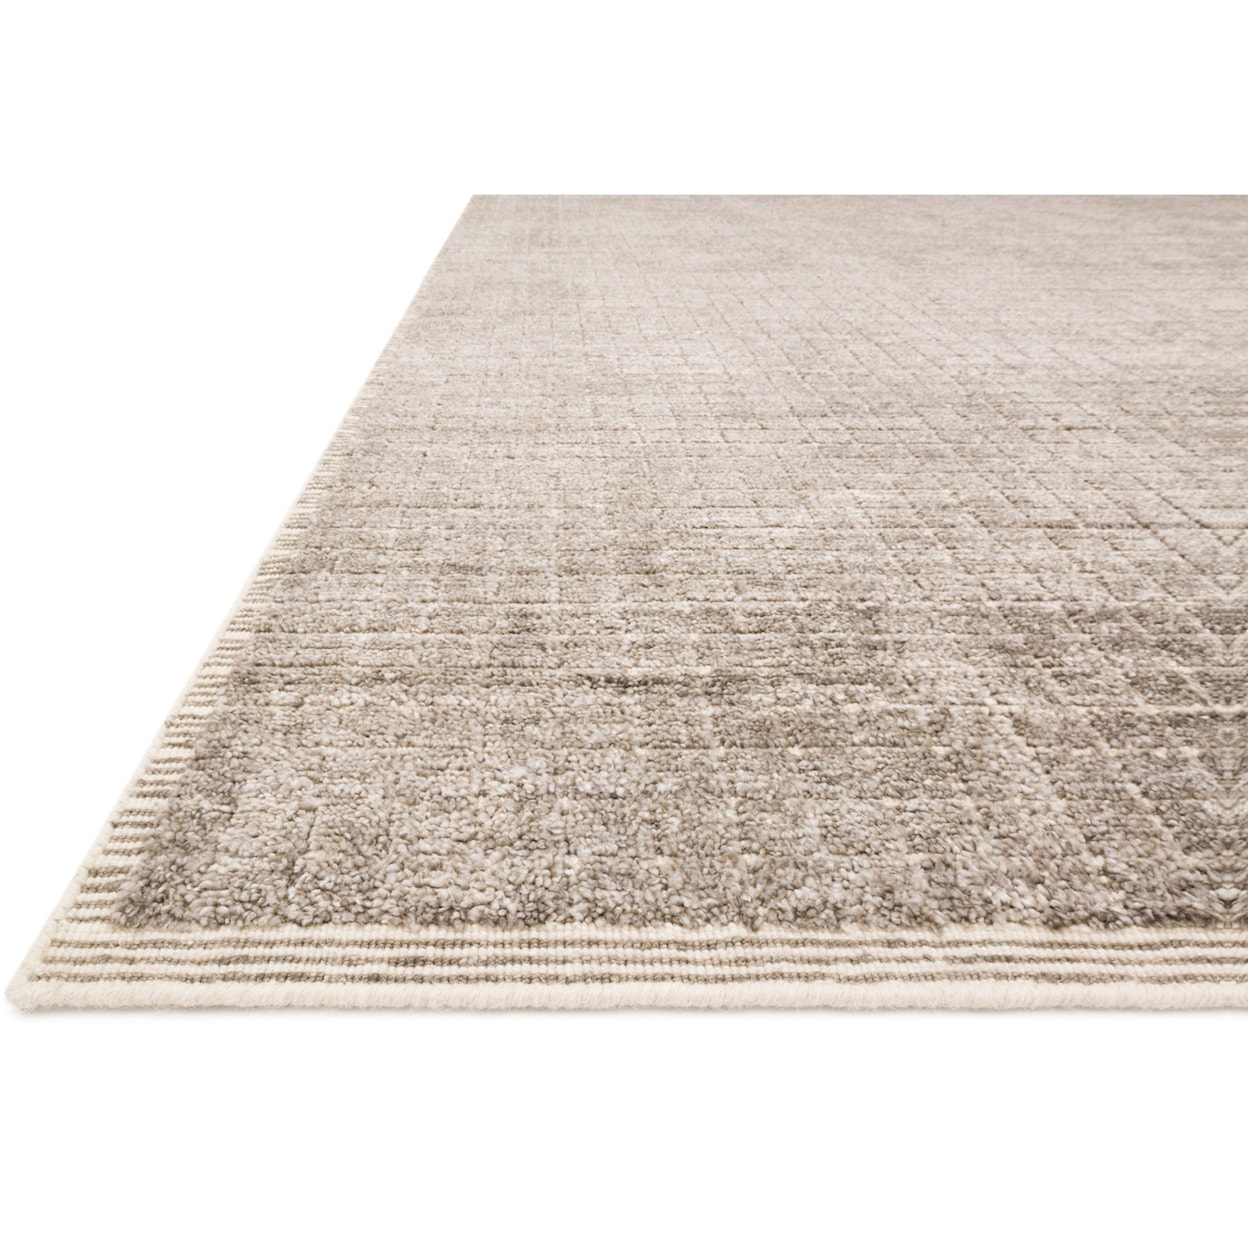 Reeds Rugs Beverly 2'0" x 3'0" Stone Rug